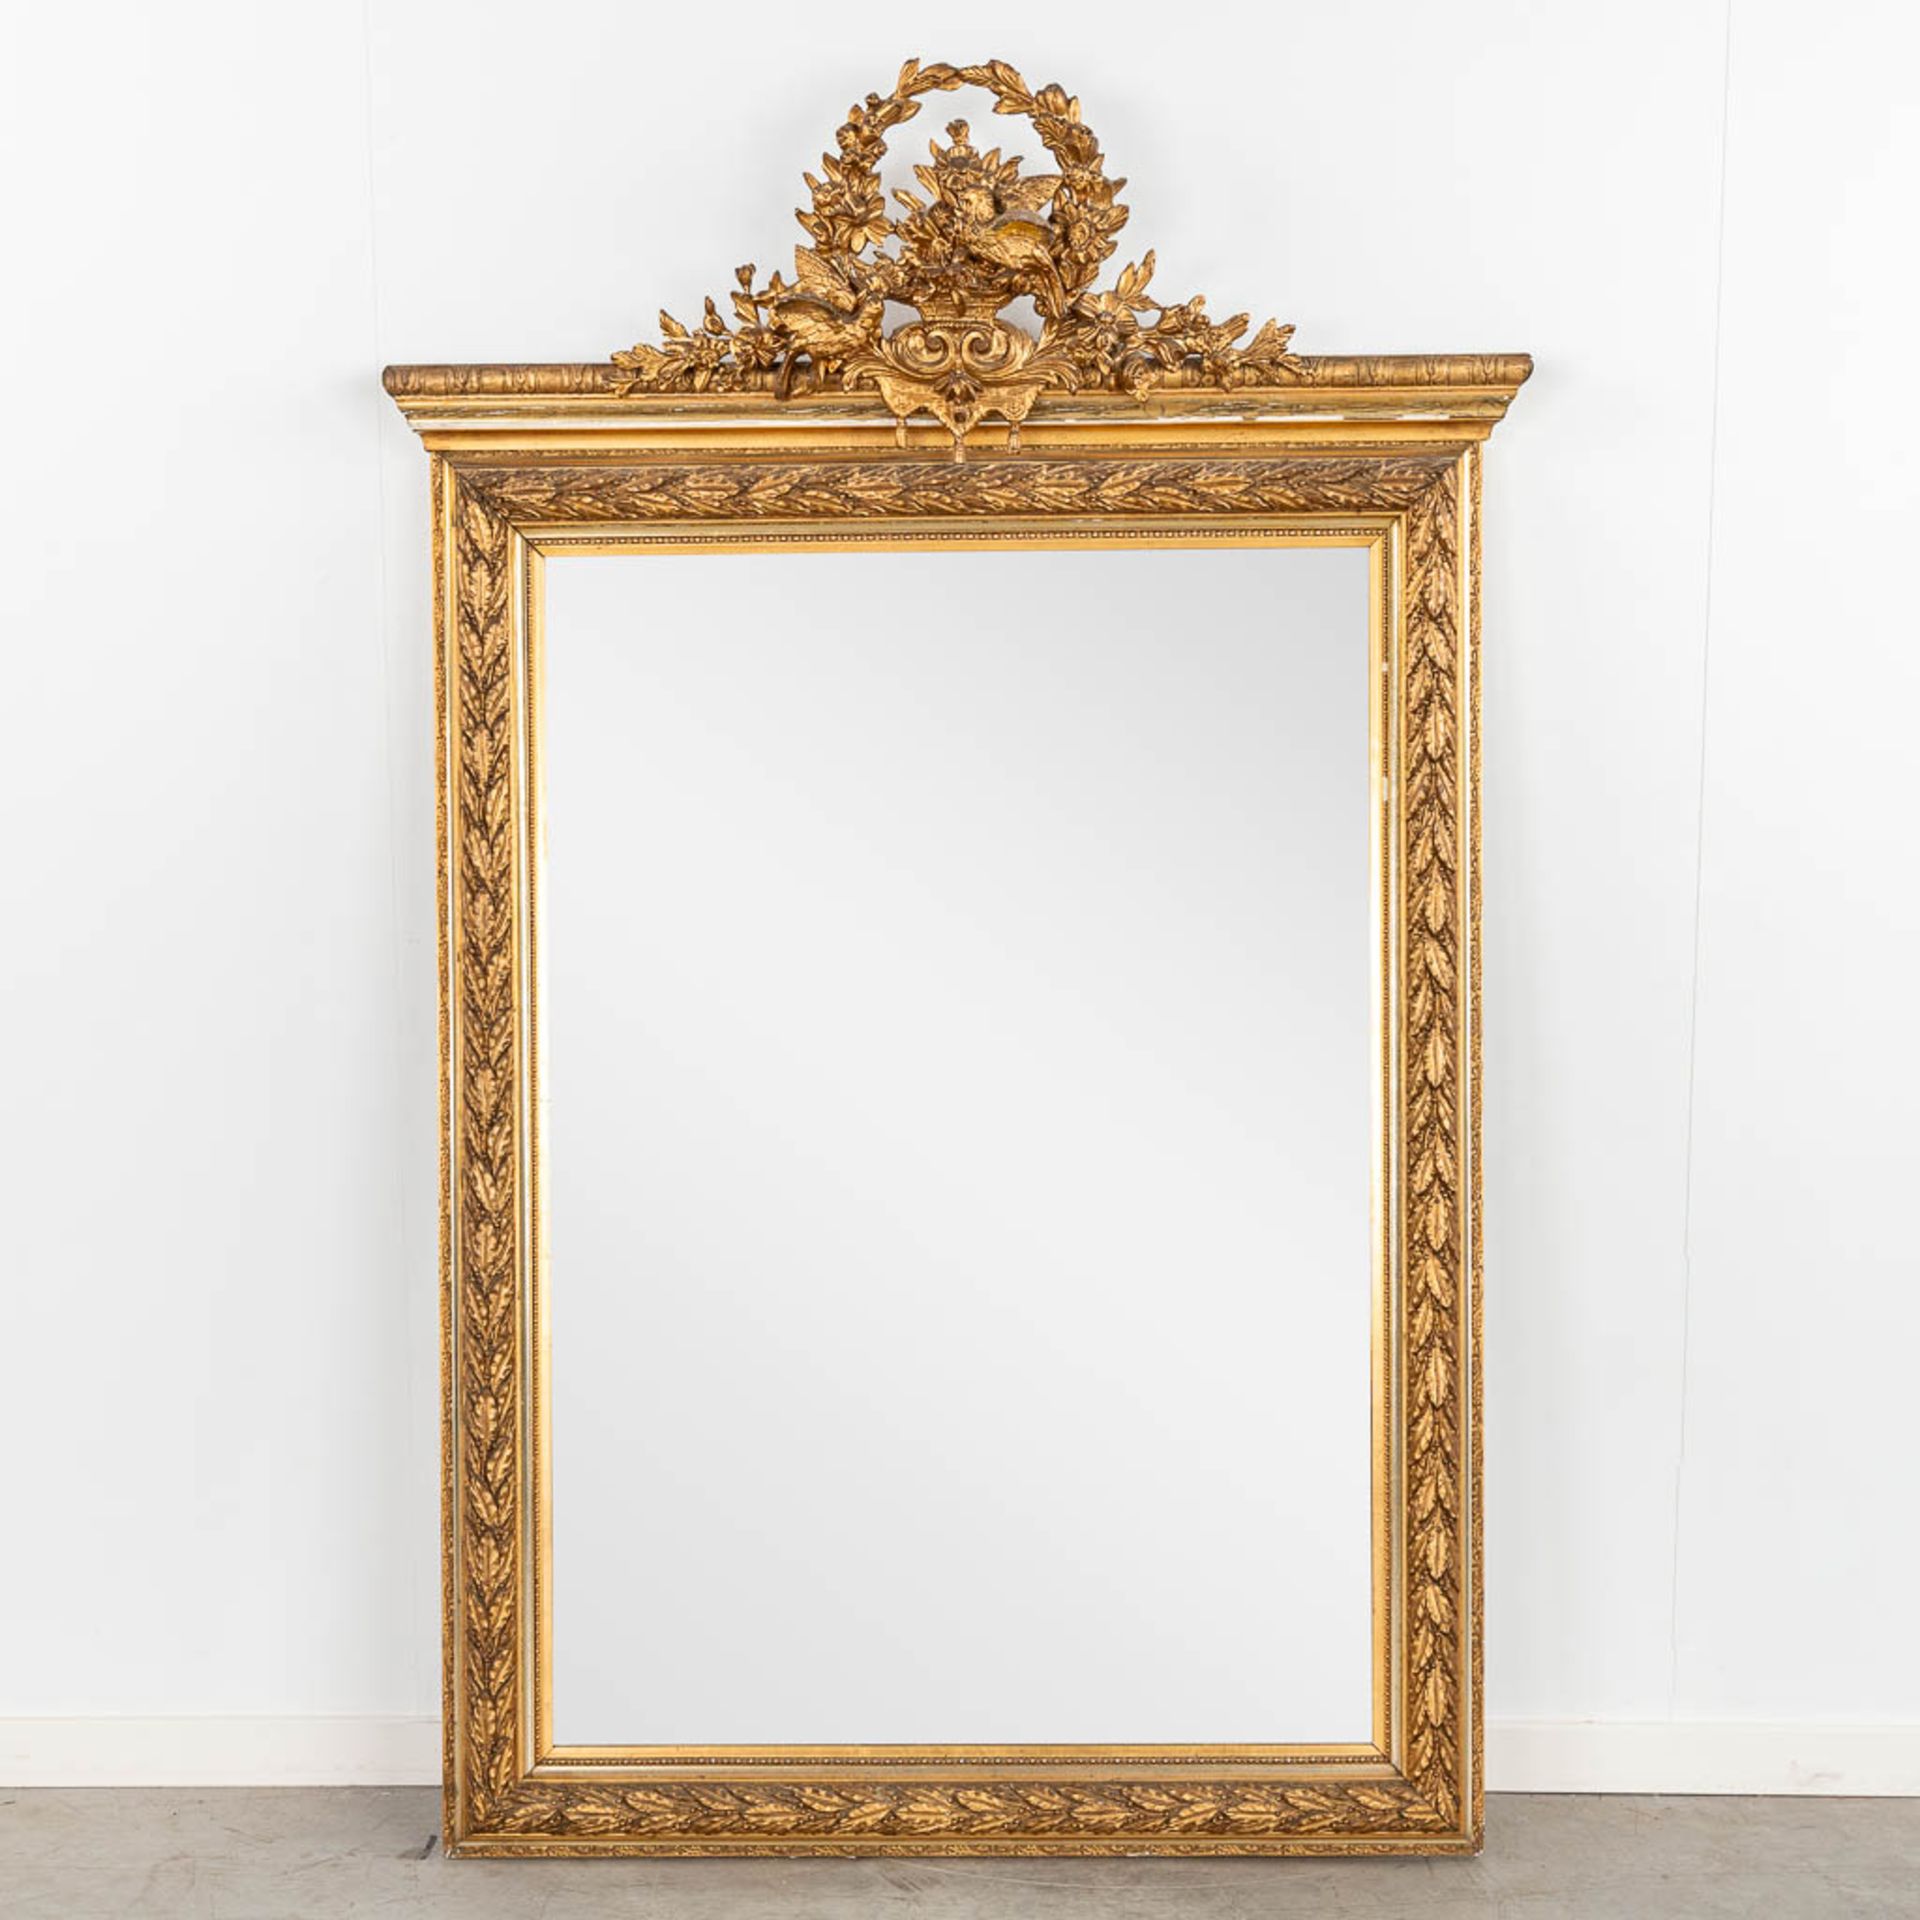 An antique mirror decorated with 'Lovebirds', circa 1900. (W:103 x H:162 cm)